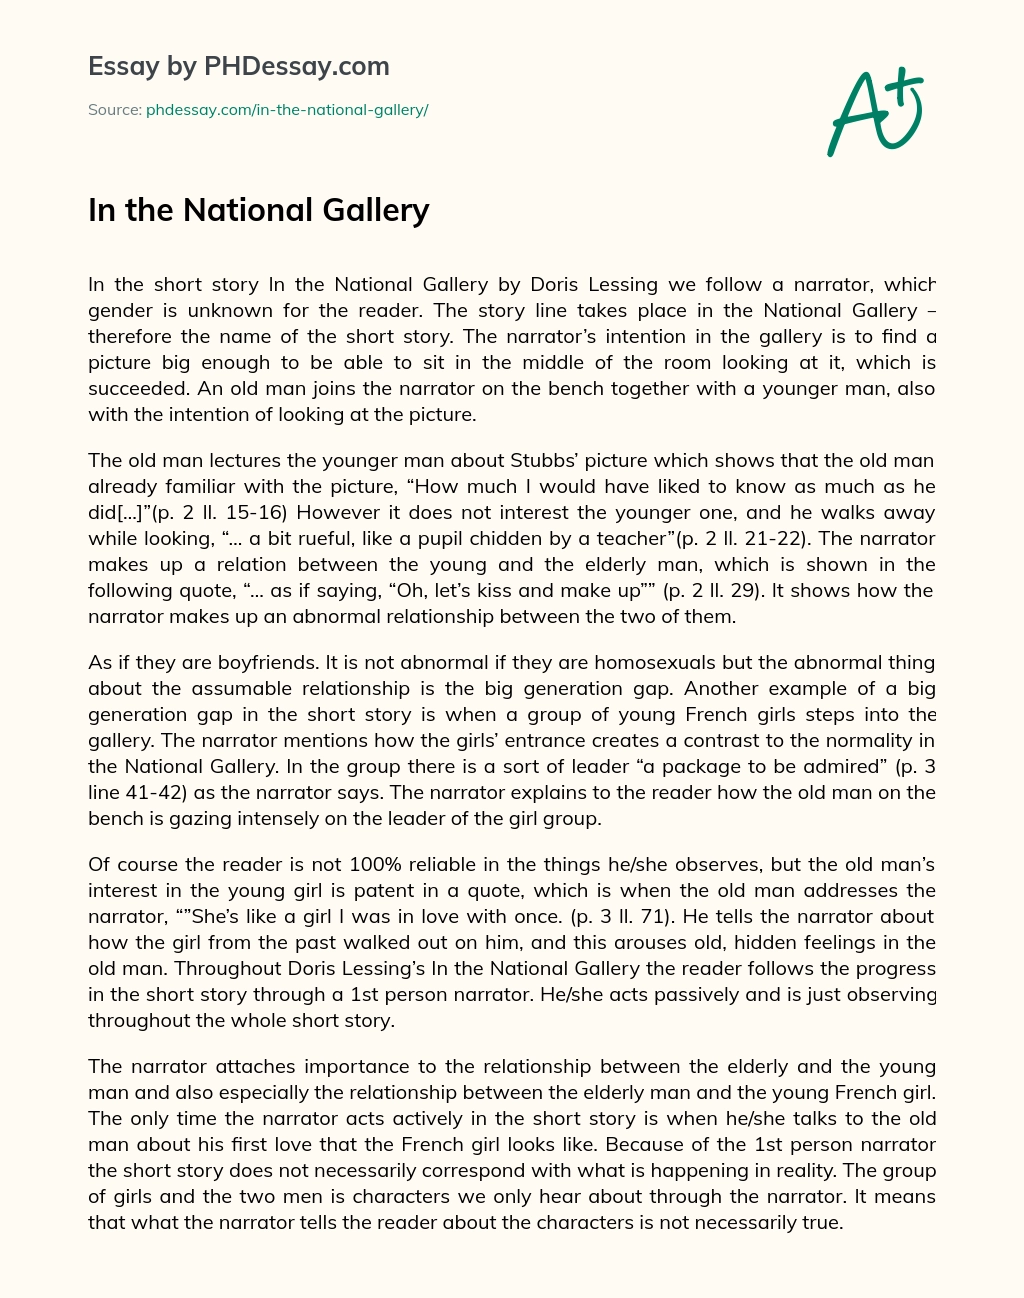 In the National Gallery essay